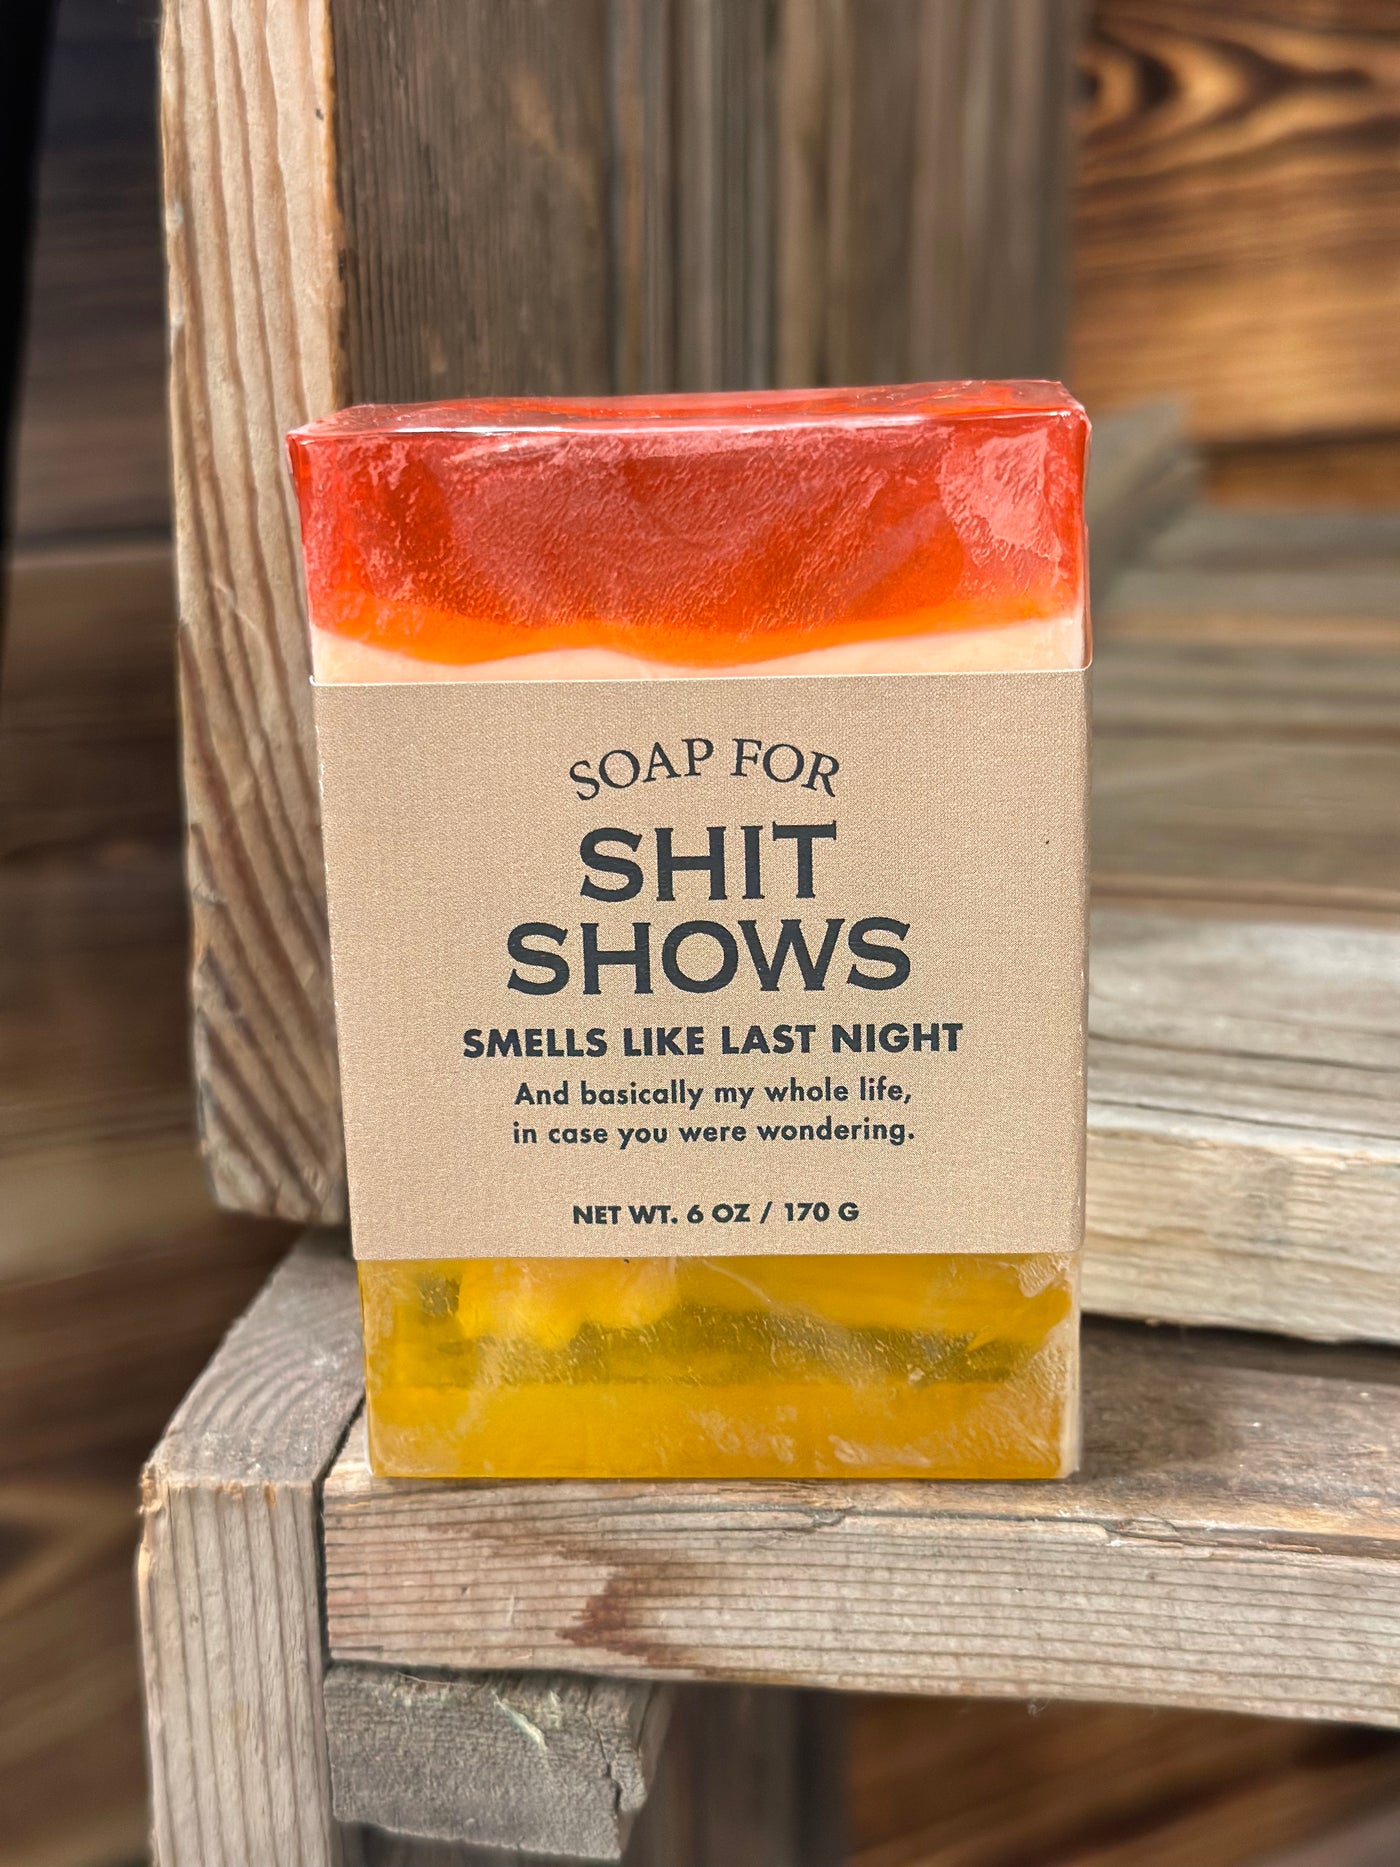 A Soap For.....